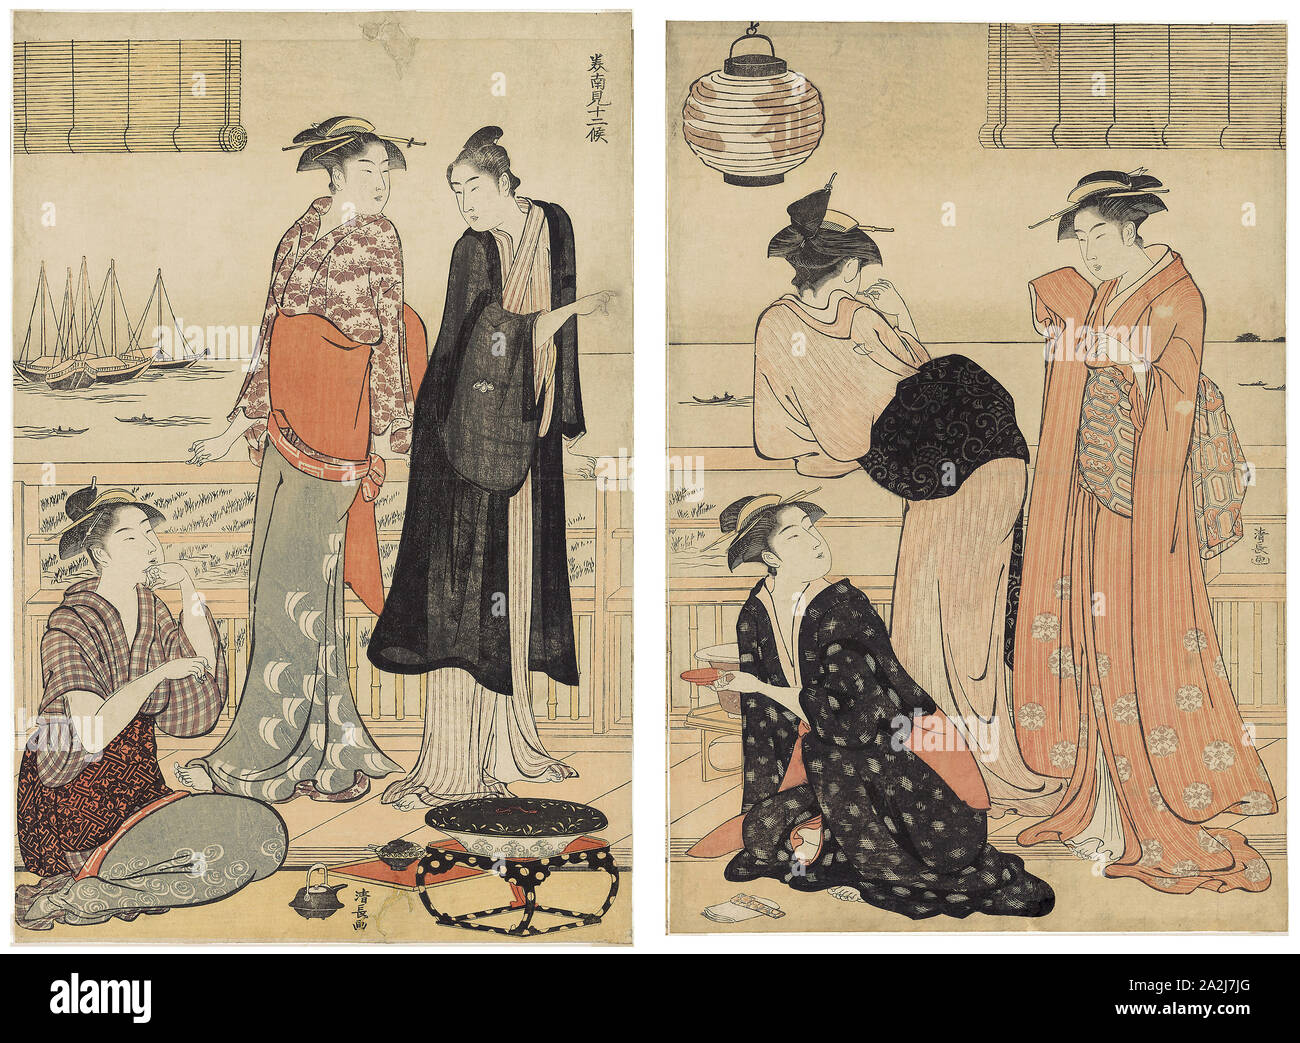 The Sixth Month, Enjoying the Evening Cool in a Teahouse, from the series The Twelve Months in the Southern Quarter (Minami jūni kō), About 1783, Torii Kiyonaga, Japanese, 1752-1815, Japan, Color woodblock prints, oban diptych, 39.1 x 52 cm (overall), 38.4 x 26.0 cm (right sheet), 39.1 x 26.0 cm (left sheet Stock Photo